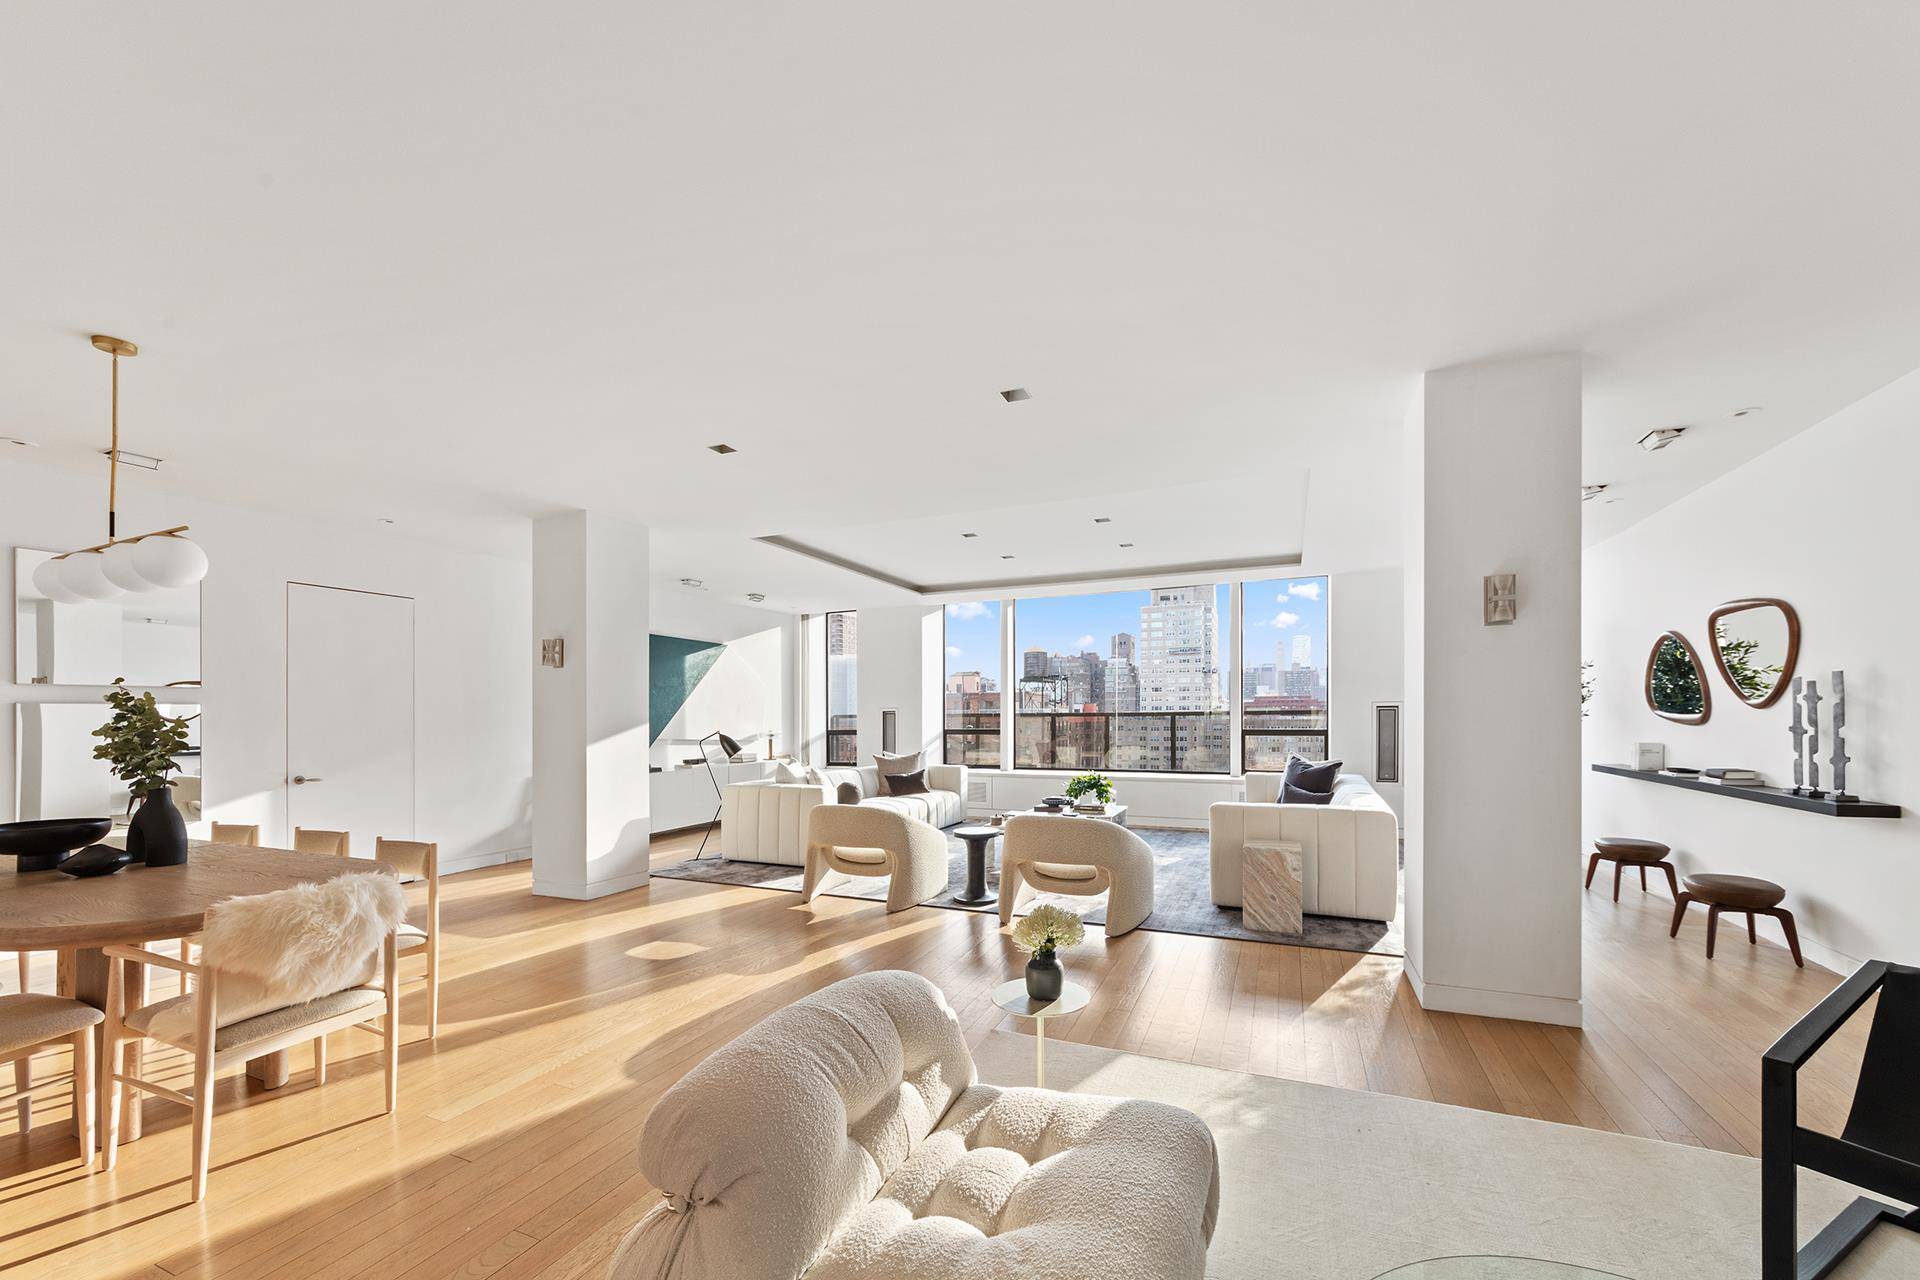 Only in a superb pre war condo loft building like 12 East 12th Street does one get nearly 6000' of beautifully configured and sun filled living space looking onto unobstructed ...